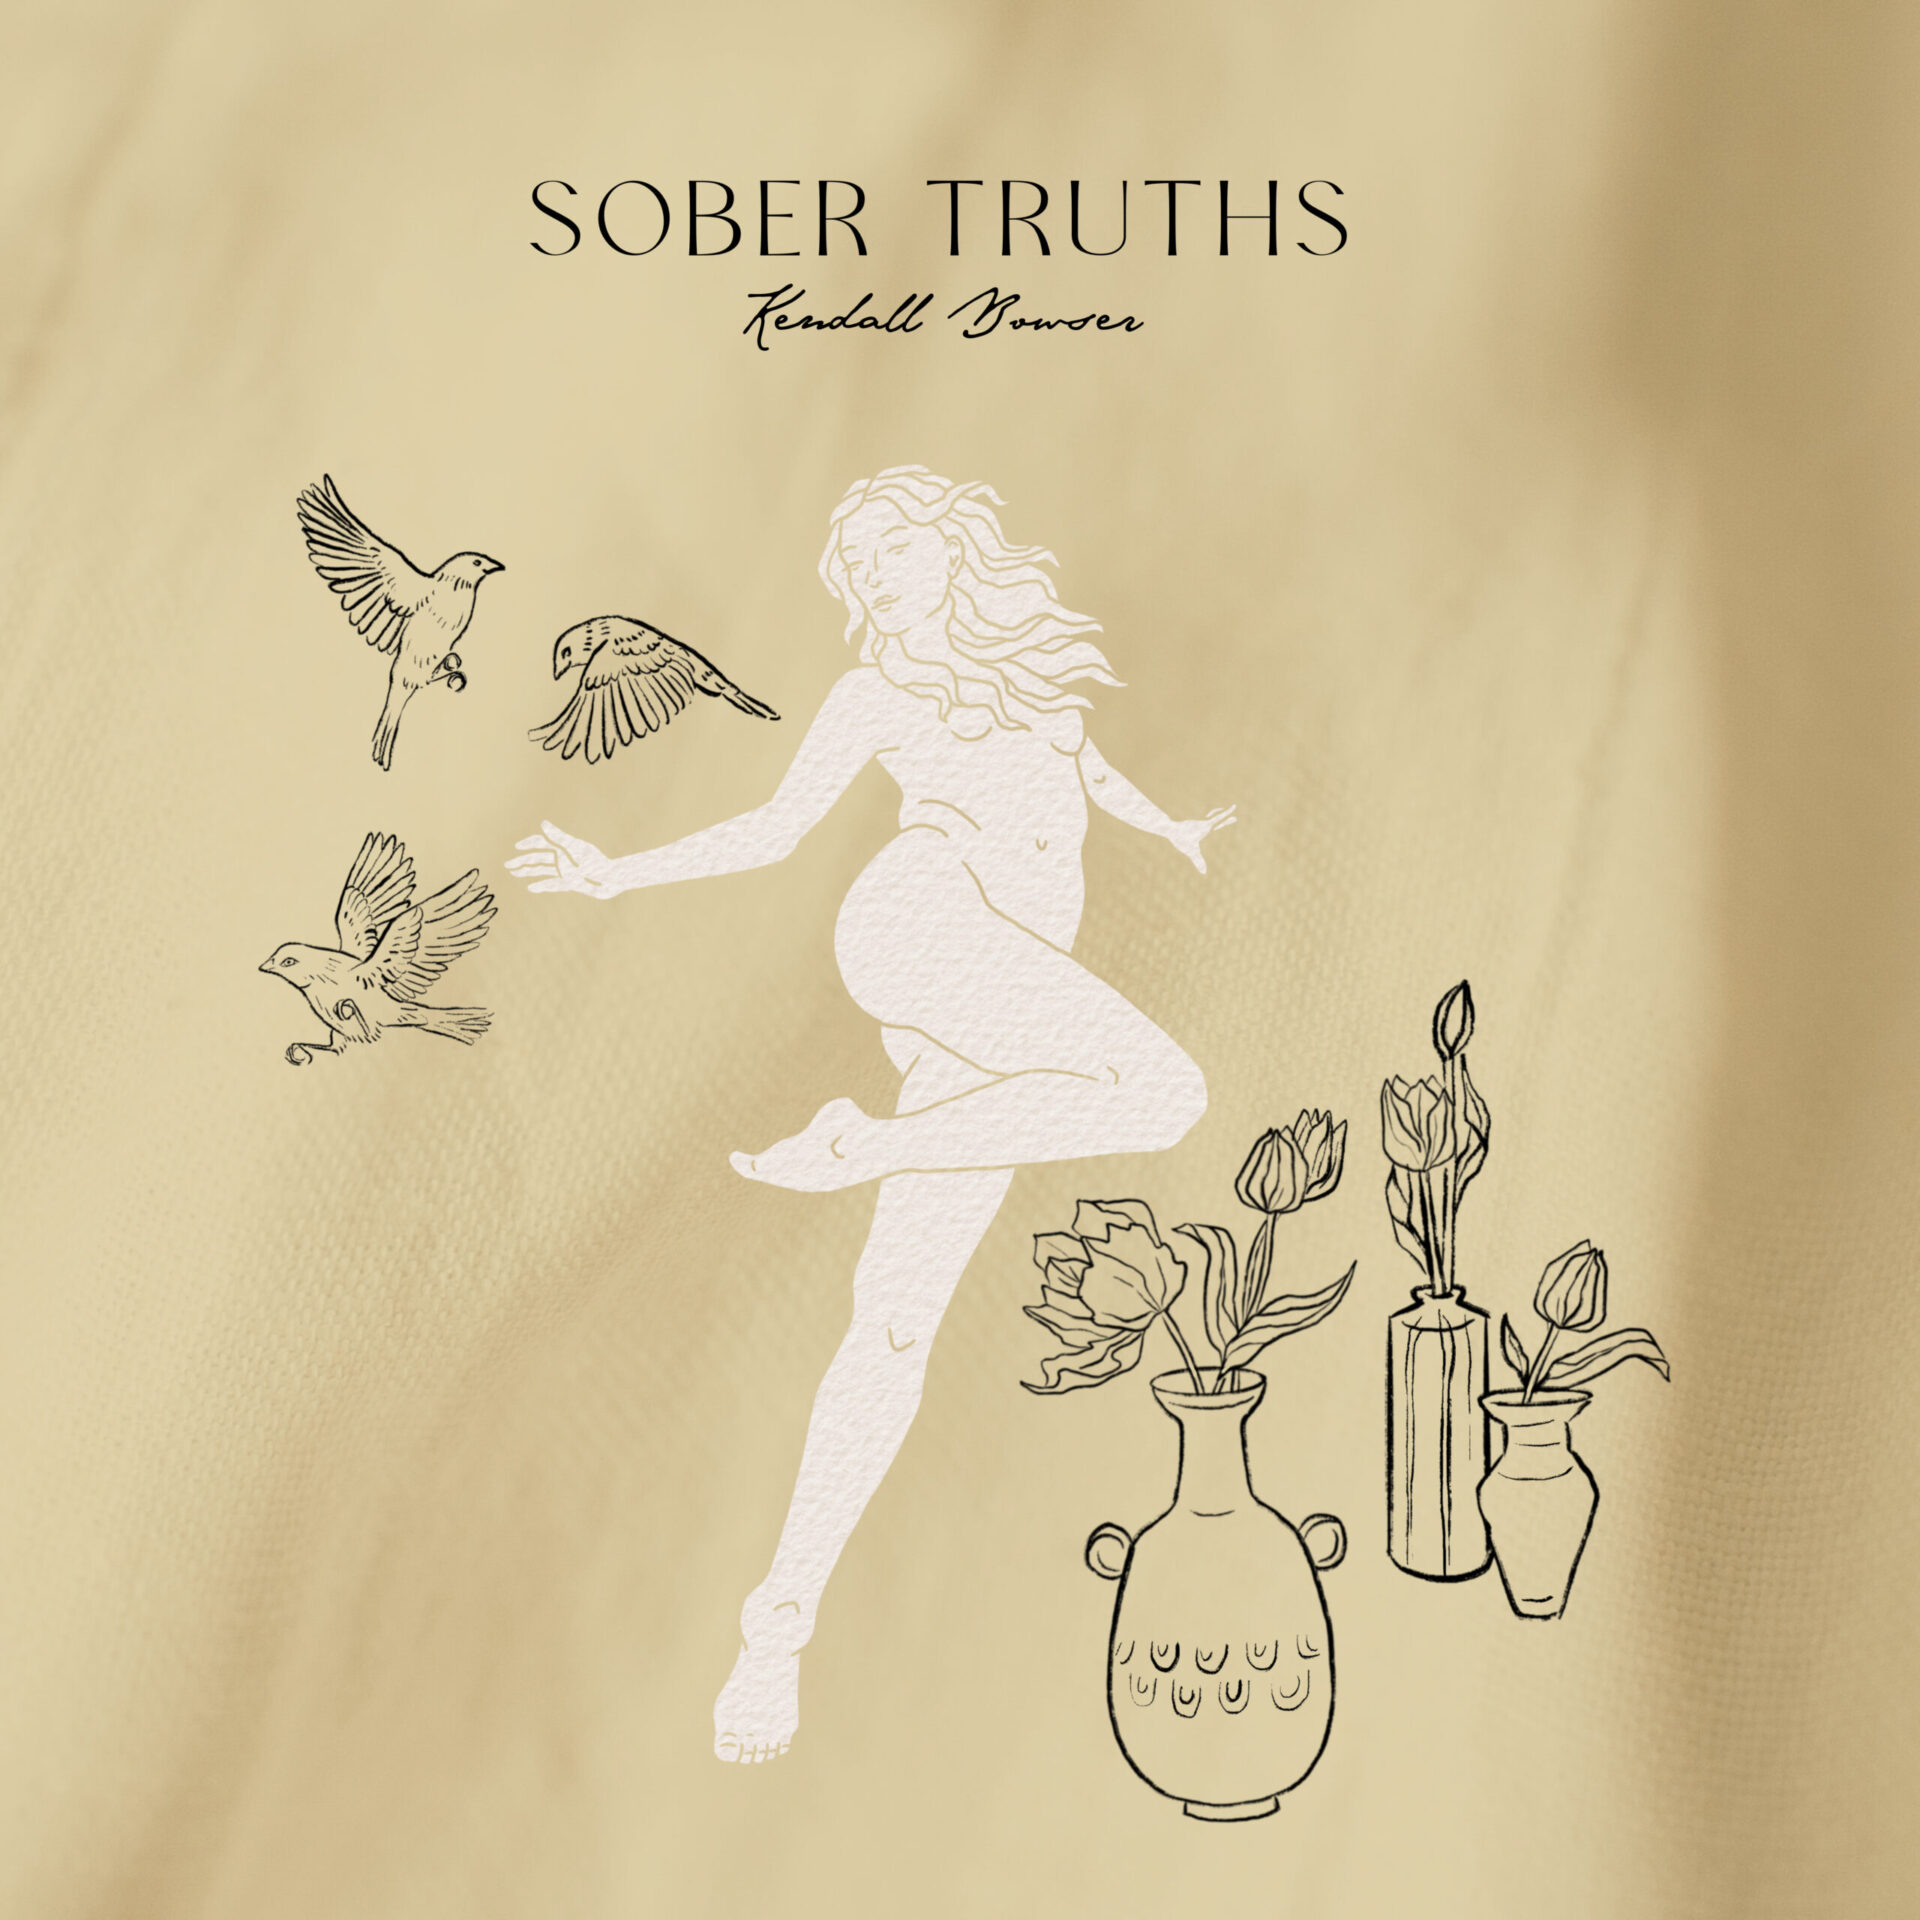 Sober Truths by Kendall Bowser art cover